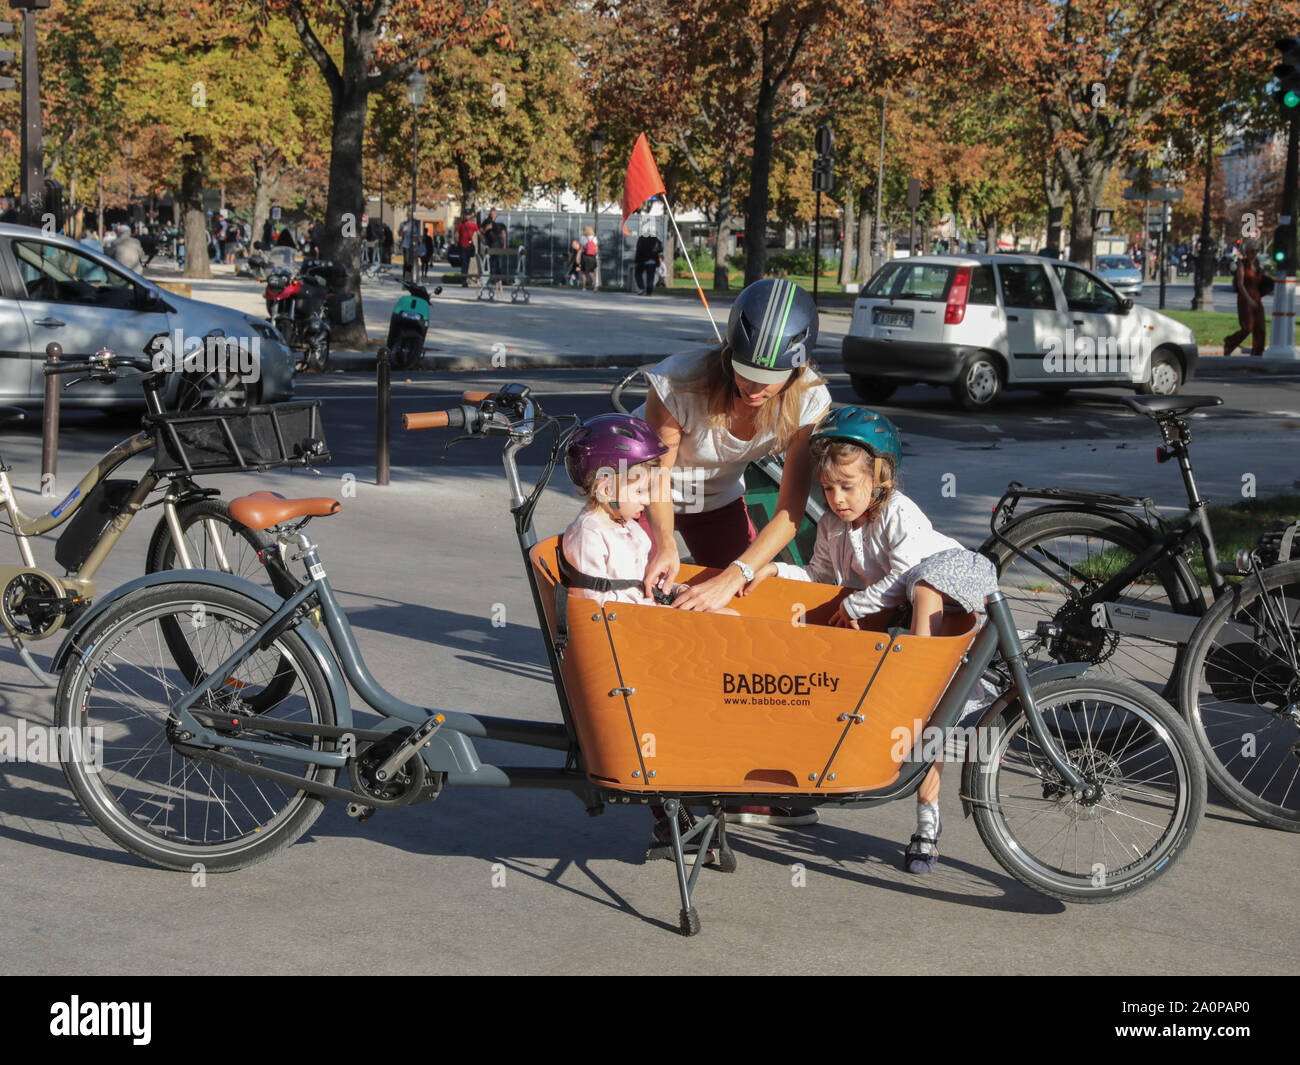 CARGO BIKES ARE CHANGING THE URBAN LANDSCAPE IN PARIS Stock Photo - Alamy